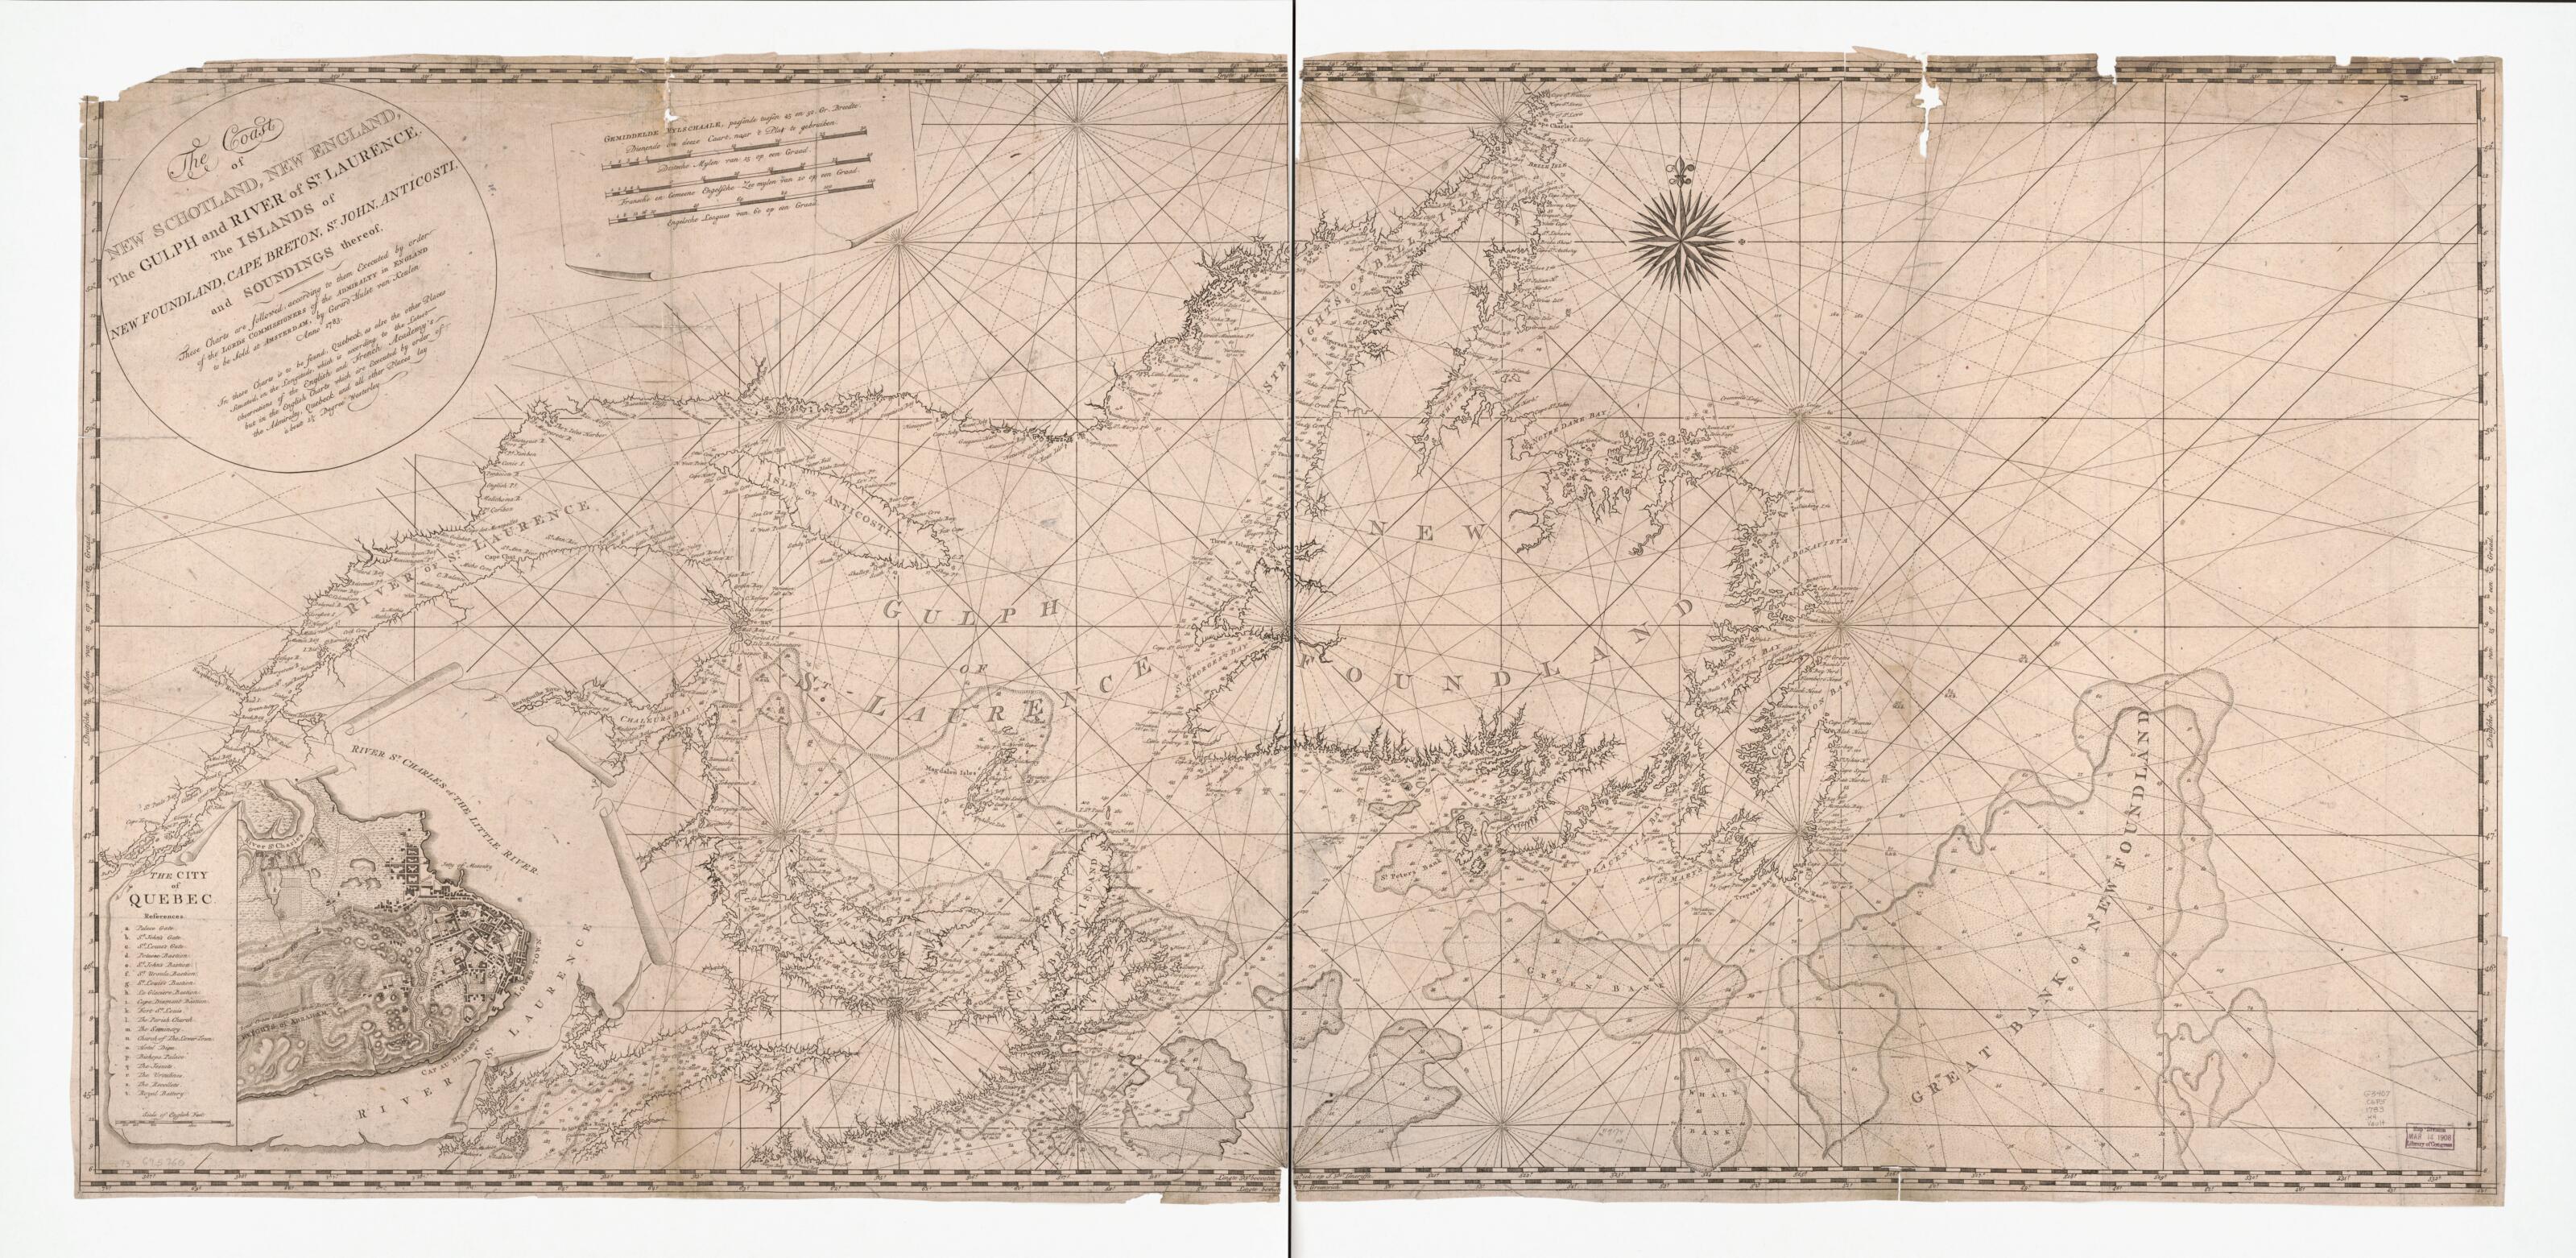 This old map of The Coast of New Schotland, New England, the Gulph and River of St. Laurence : the Islands of Newfoundland, Cape Breton, St. John, Anticosti and Soundings Thereof from 1783 was created by Gerard Hulst Van Keulen in 1783